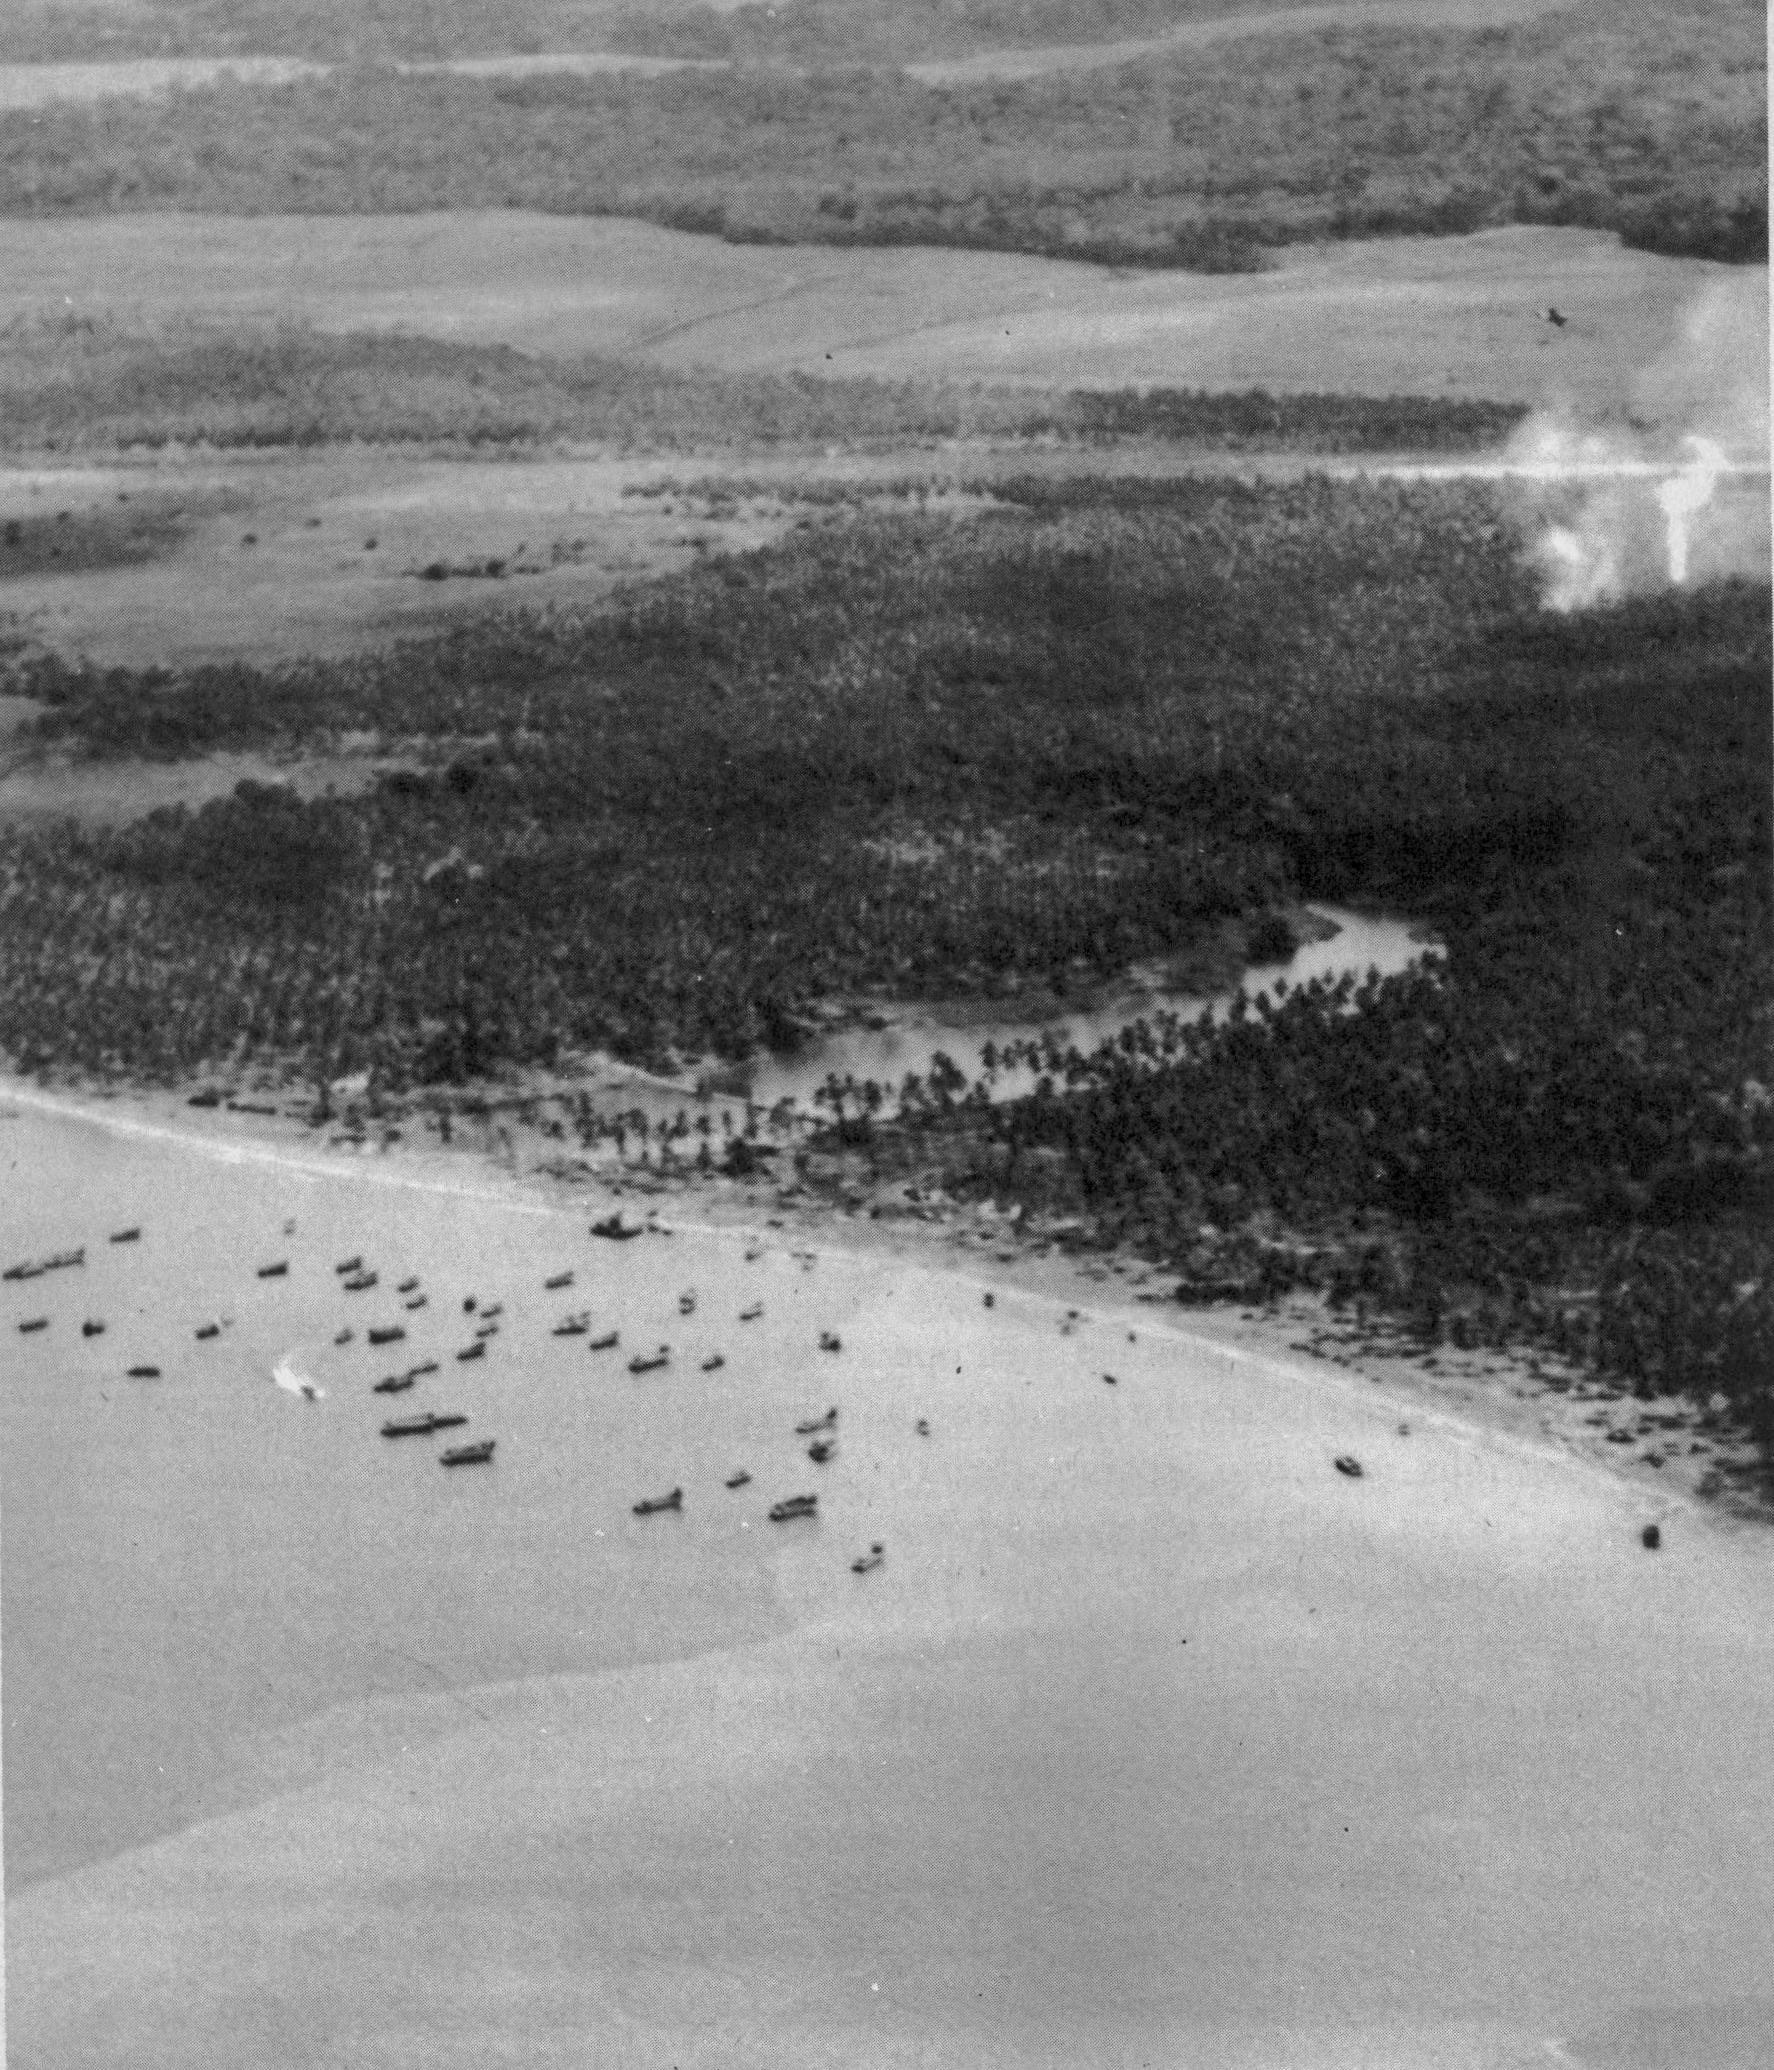 4.	An aerial photograph of Point Cruz, Guadalcanal, site of Ray Evans’s heroic combat action. (Courtesy of the U.S. Navy)